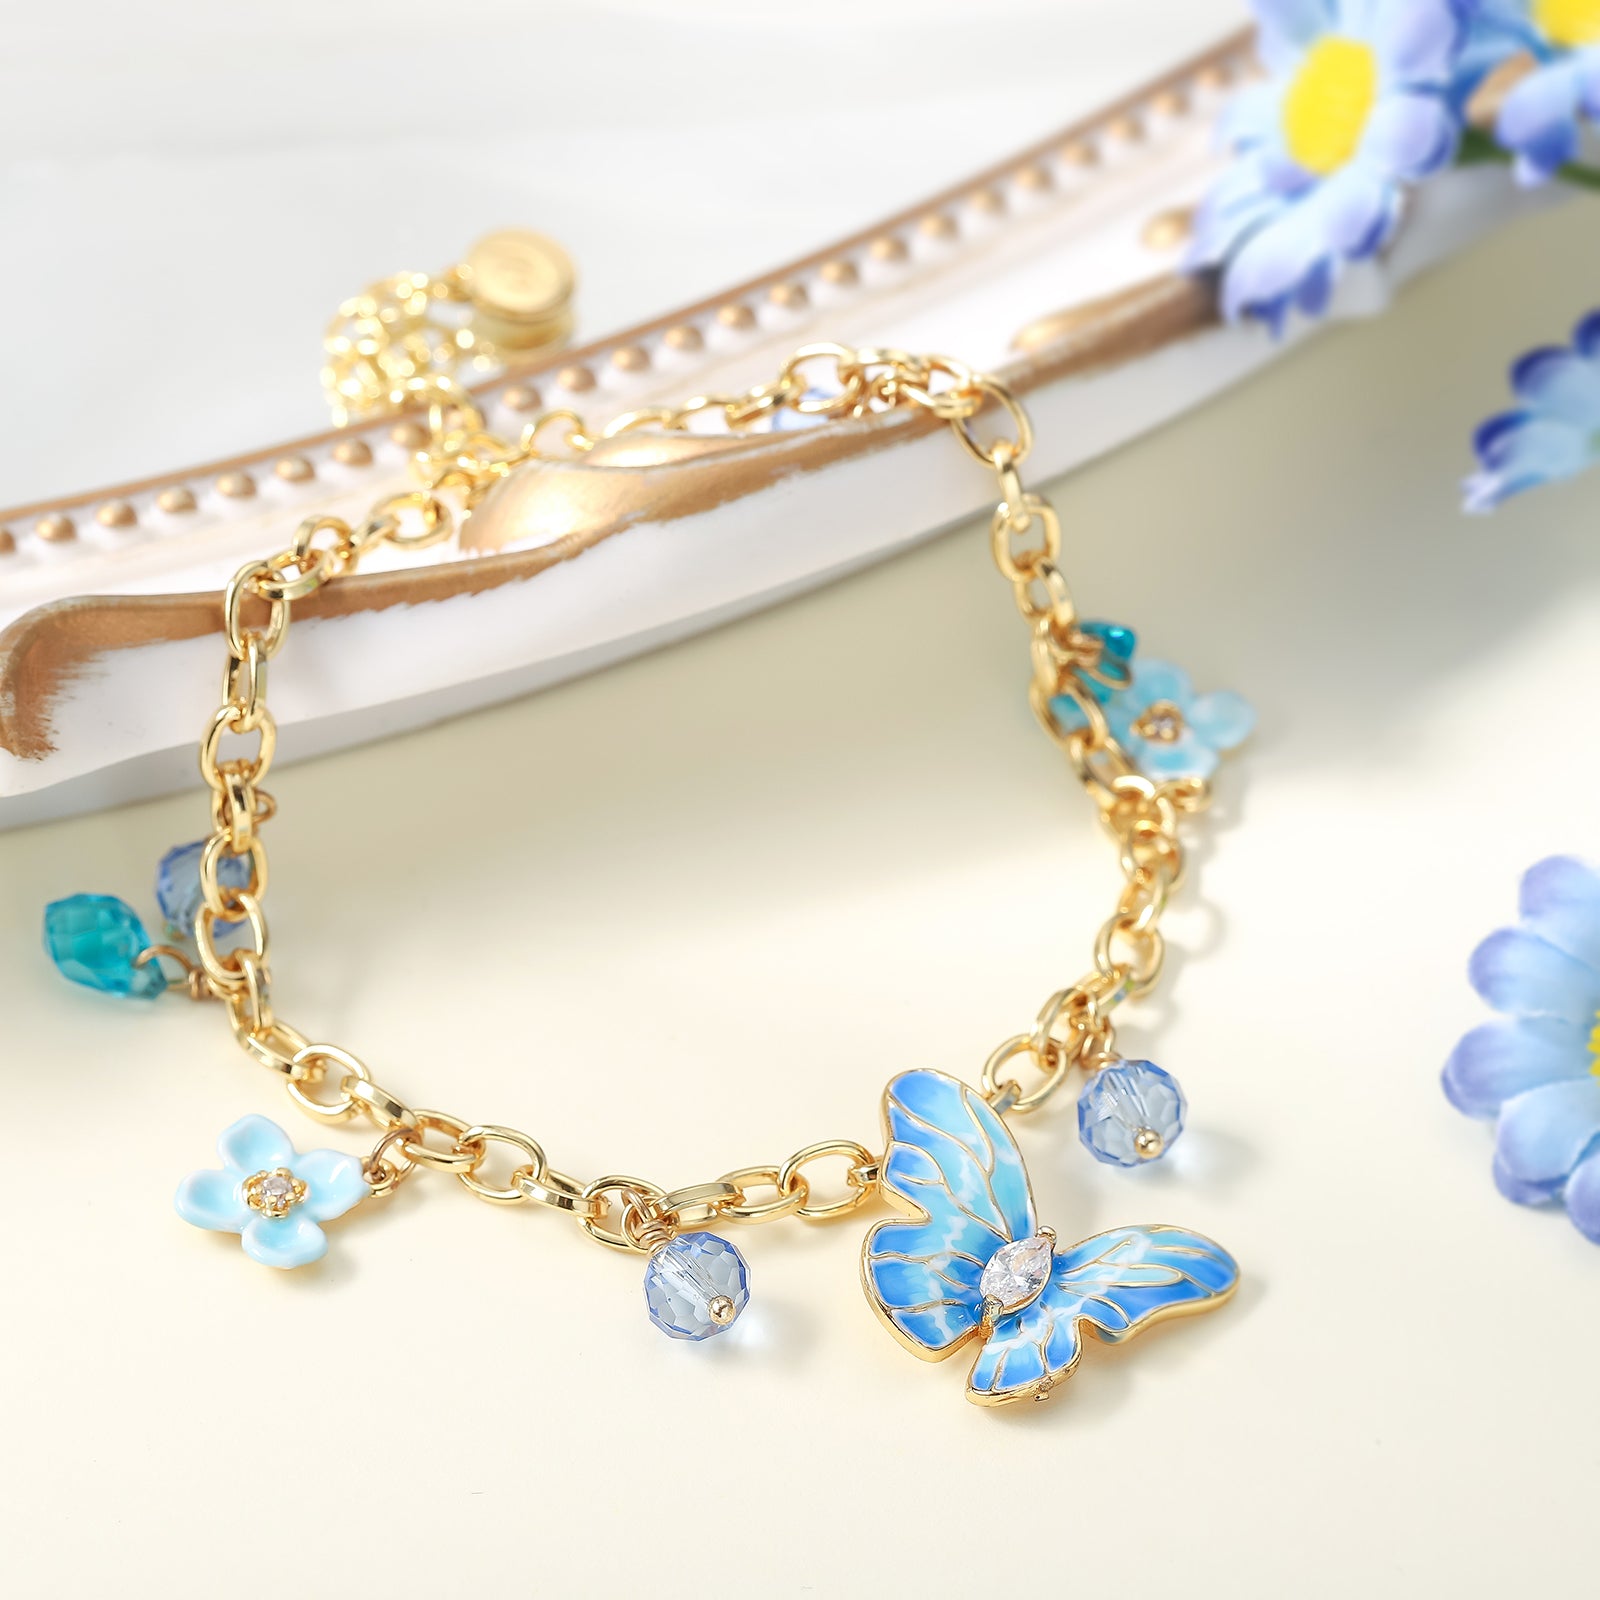 Blue Morpho Butterfly Chain Bracelet Gift Set with Gift Wrapping